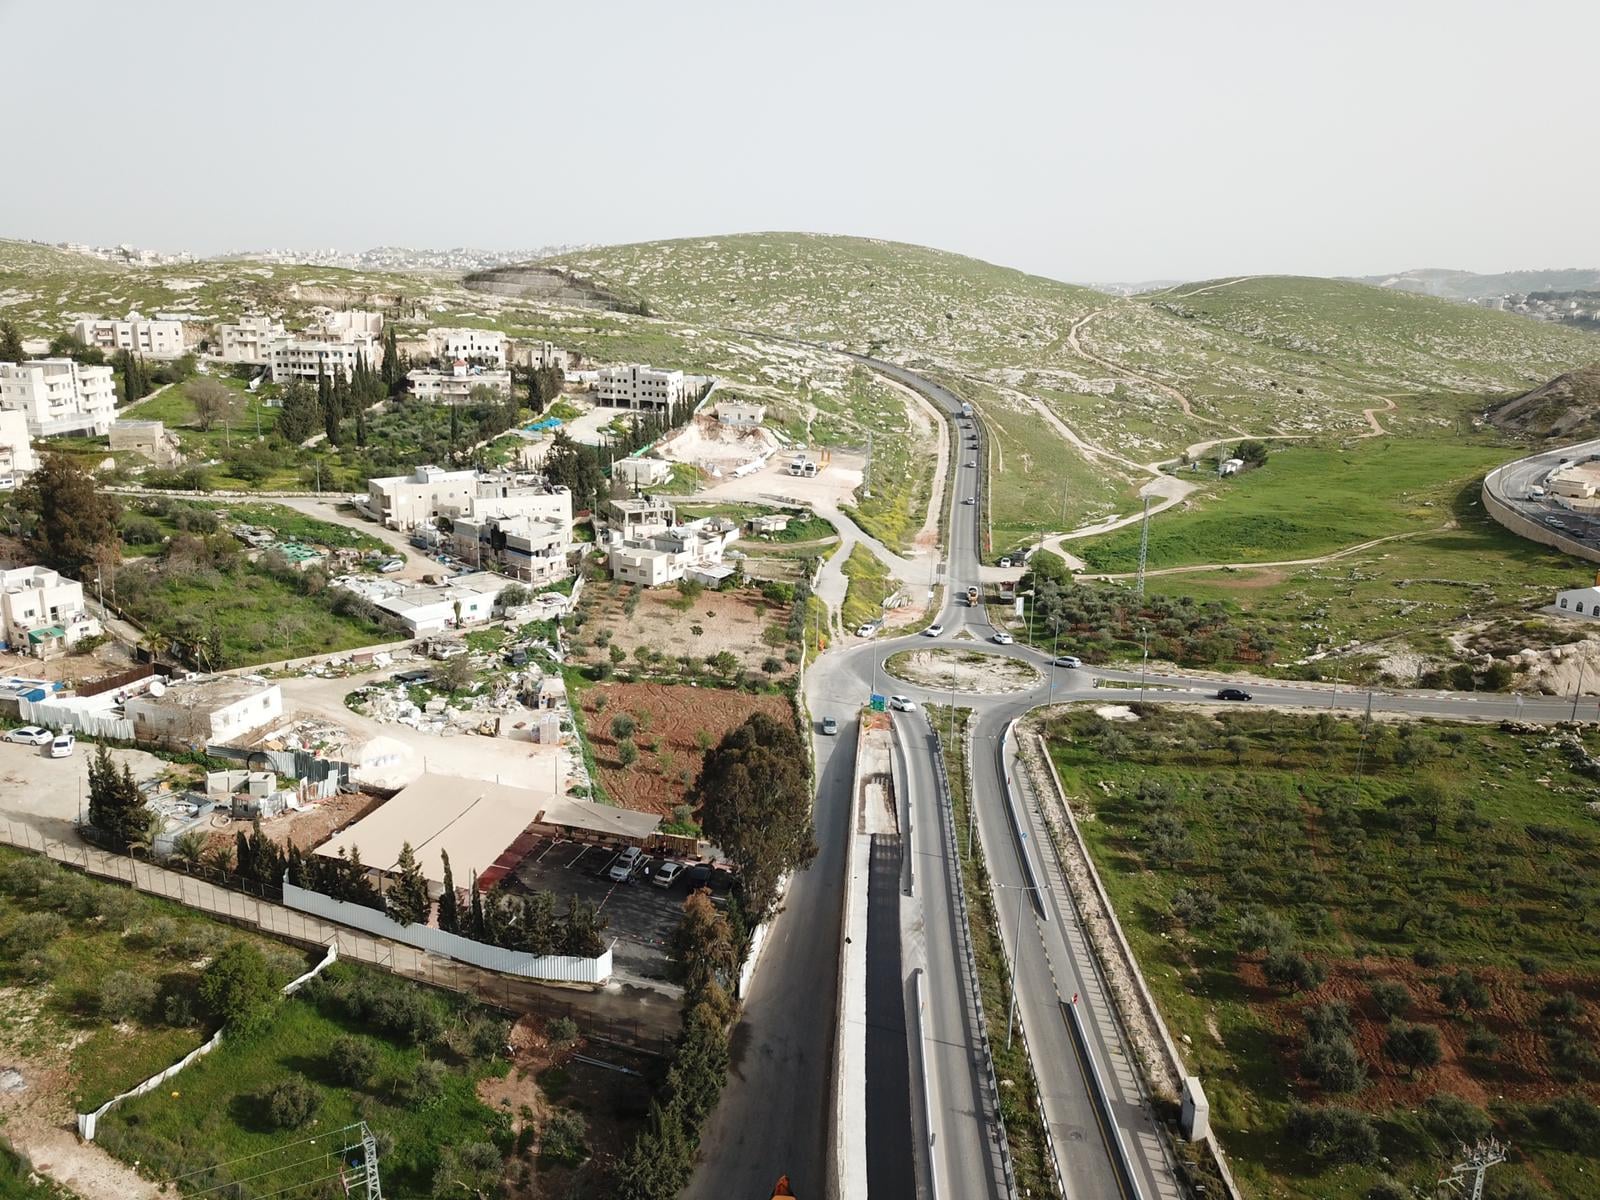 Upgrading and developing streets in Jerusalem